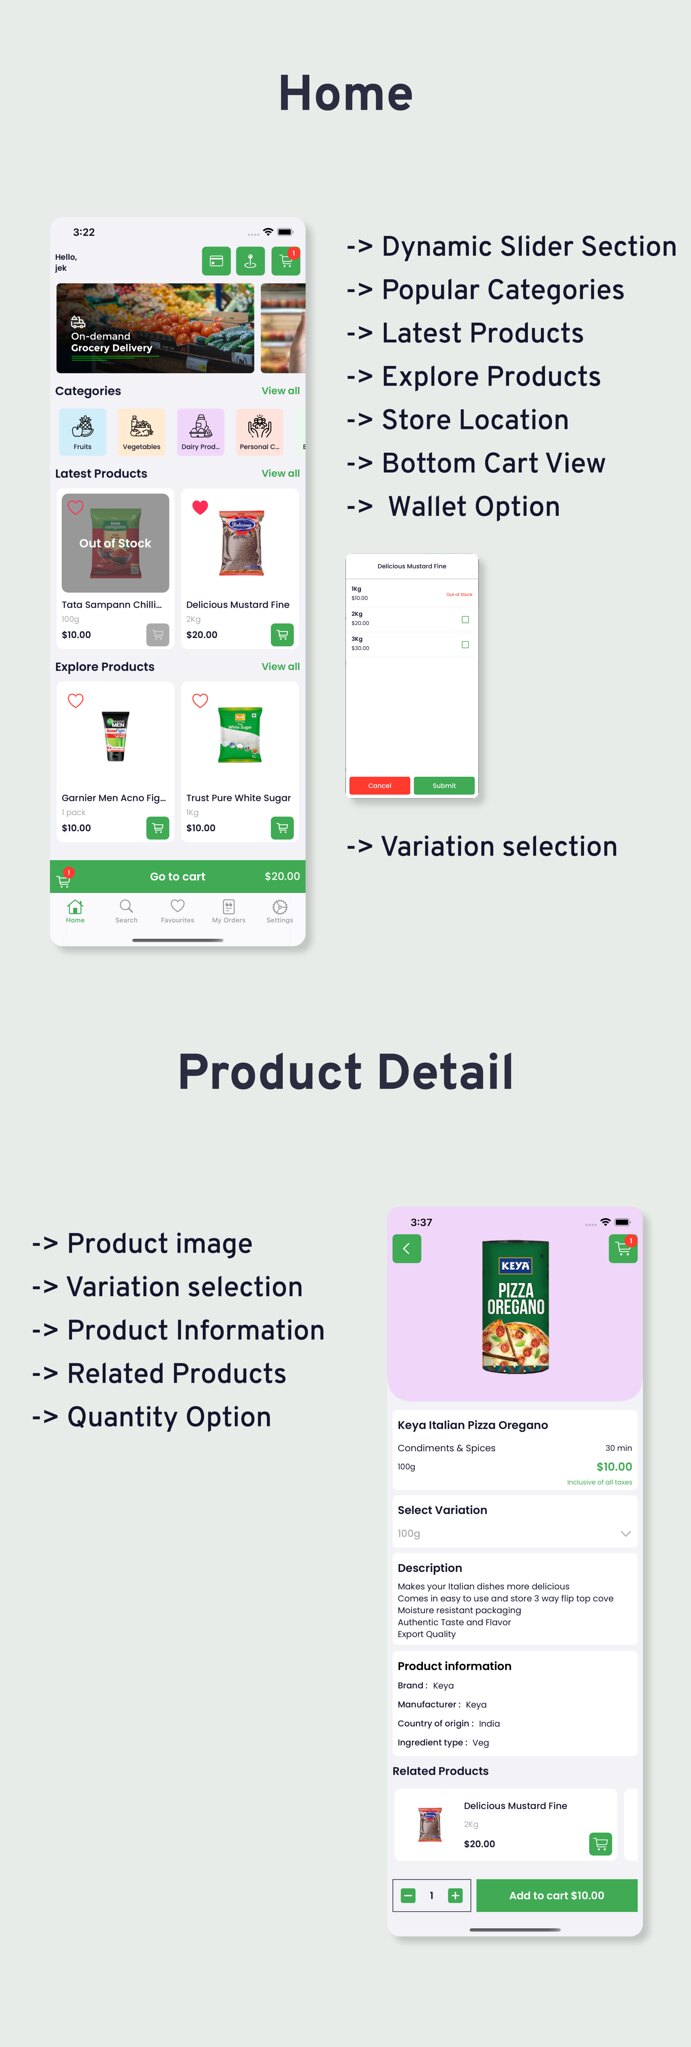 eGrocery - (Grocery, Pharmacy, eCommerce, Store) App and Web with Laravel Admin Panel + DeliveryApp - 7